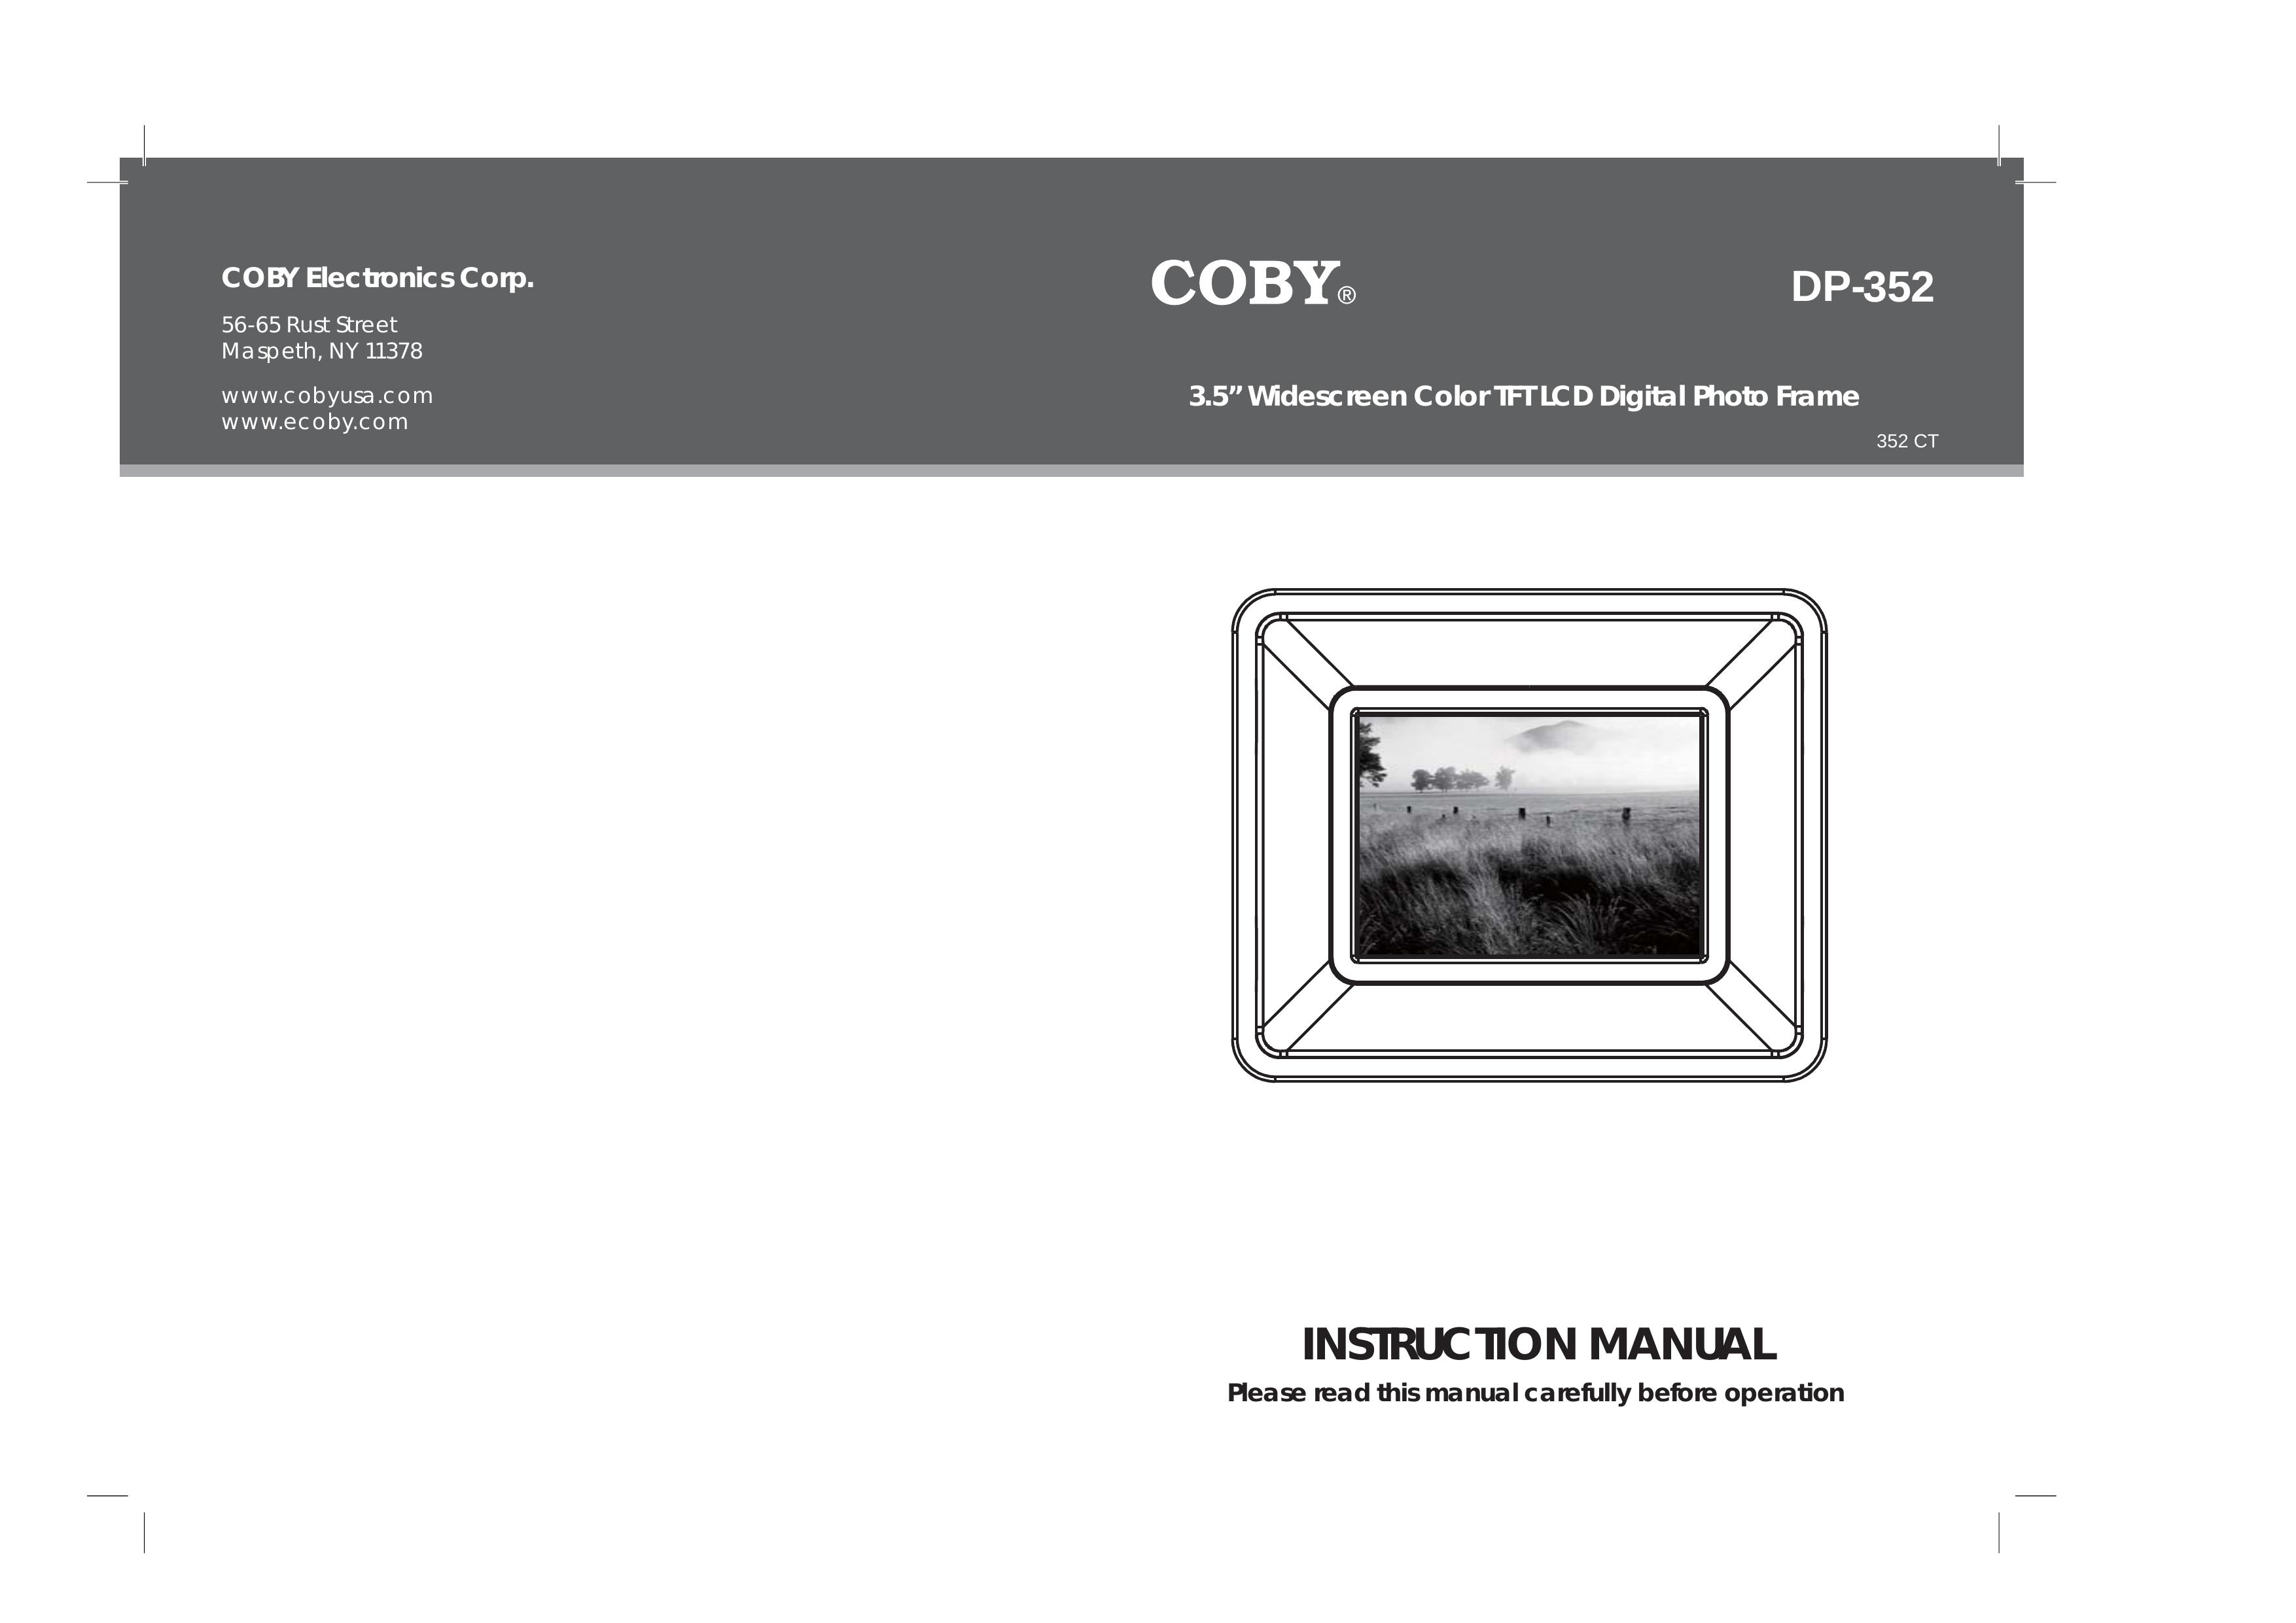 COBY electronic DP-352 CT Digital Photo Frame User Manual